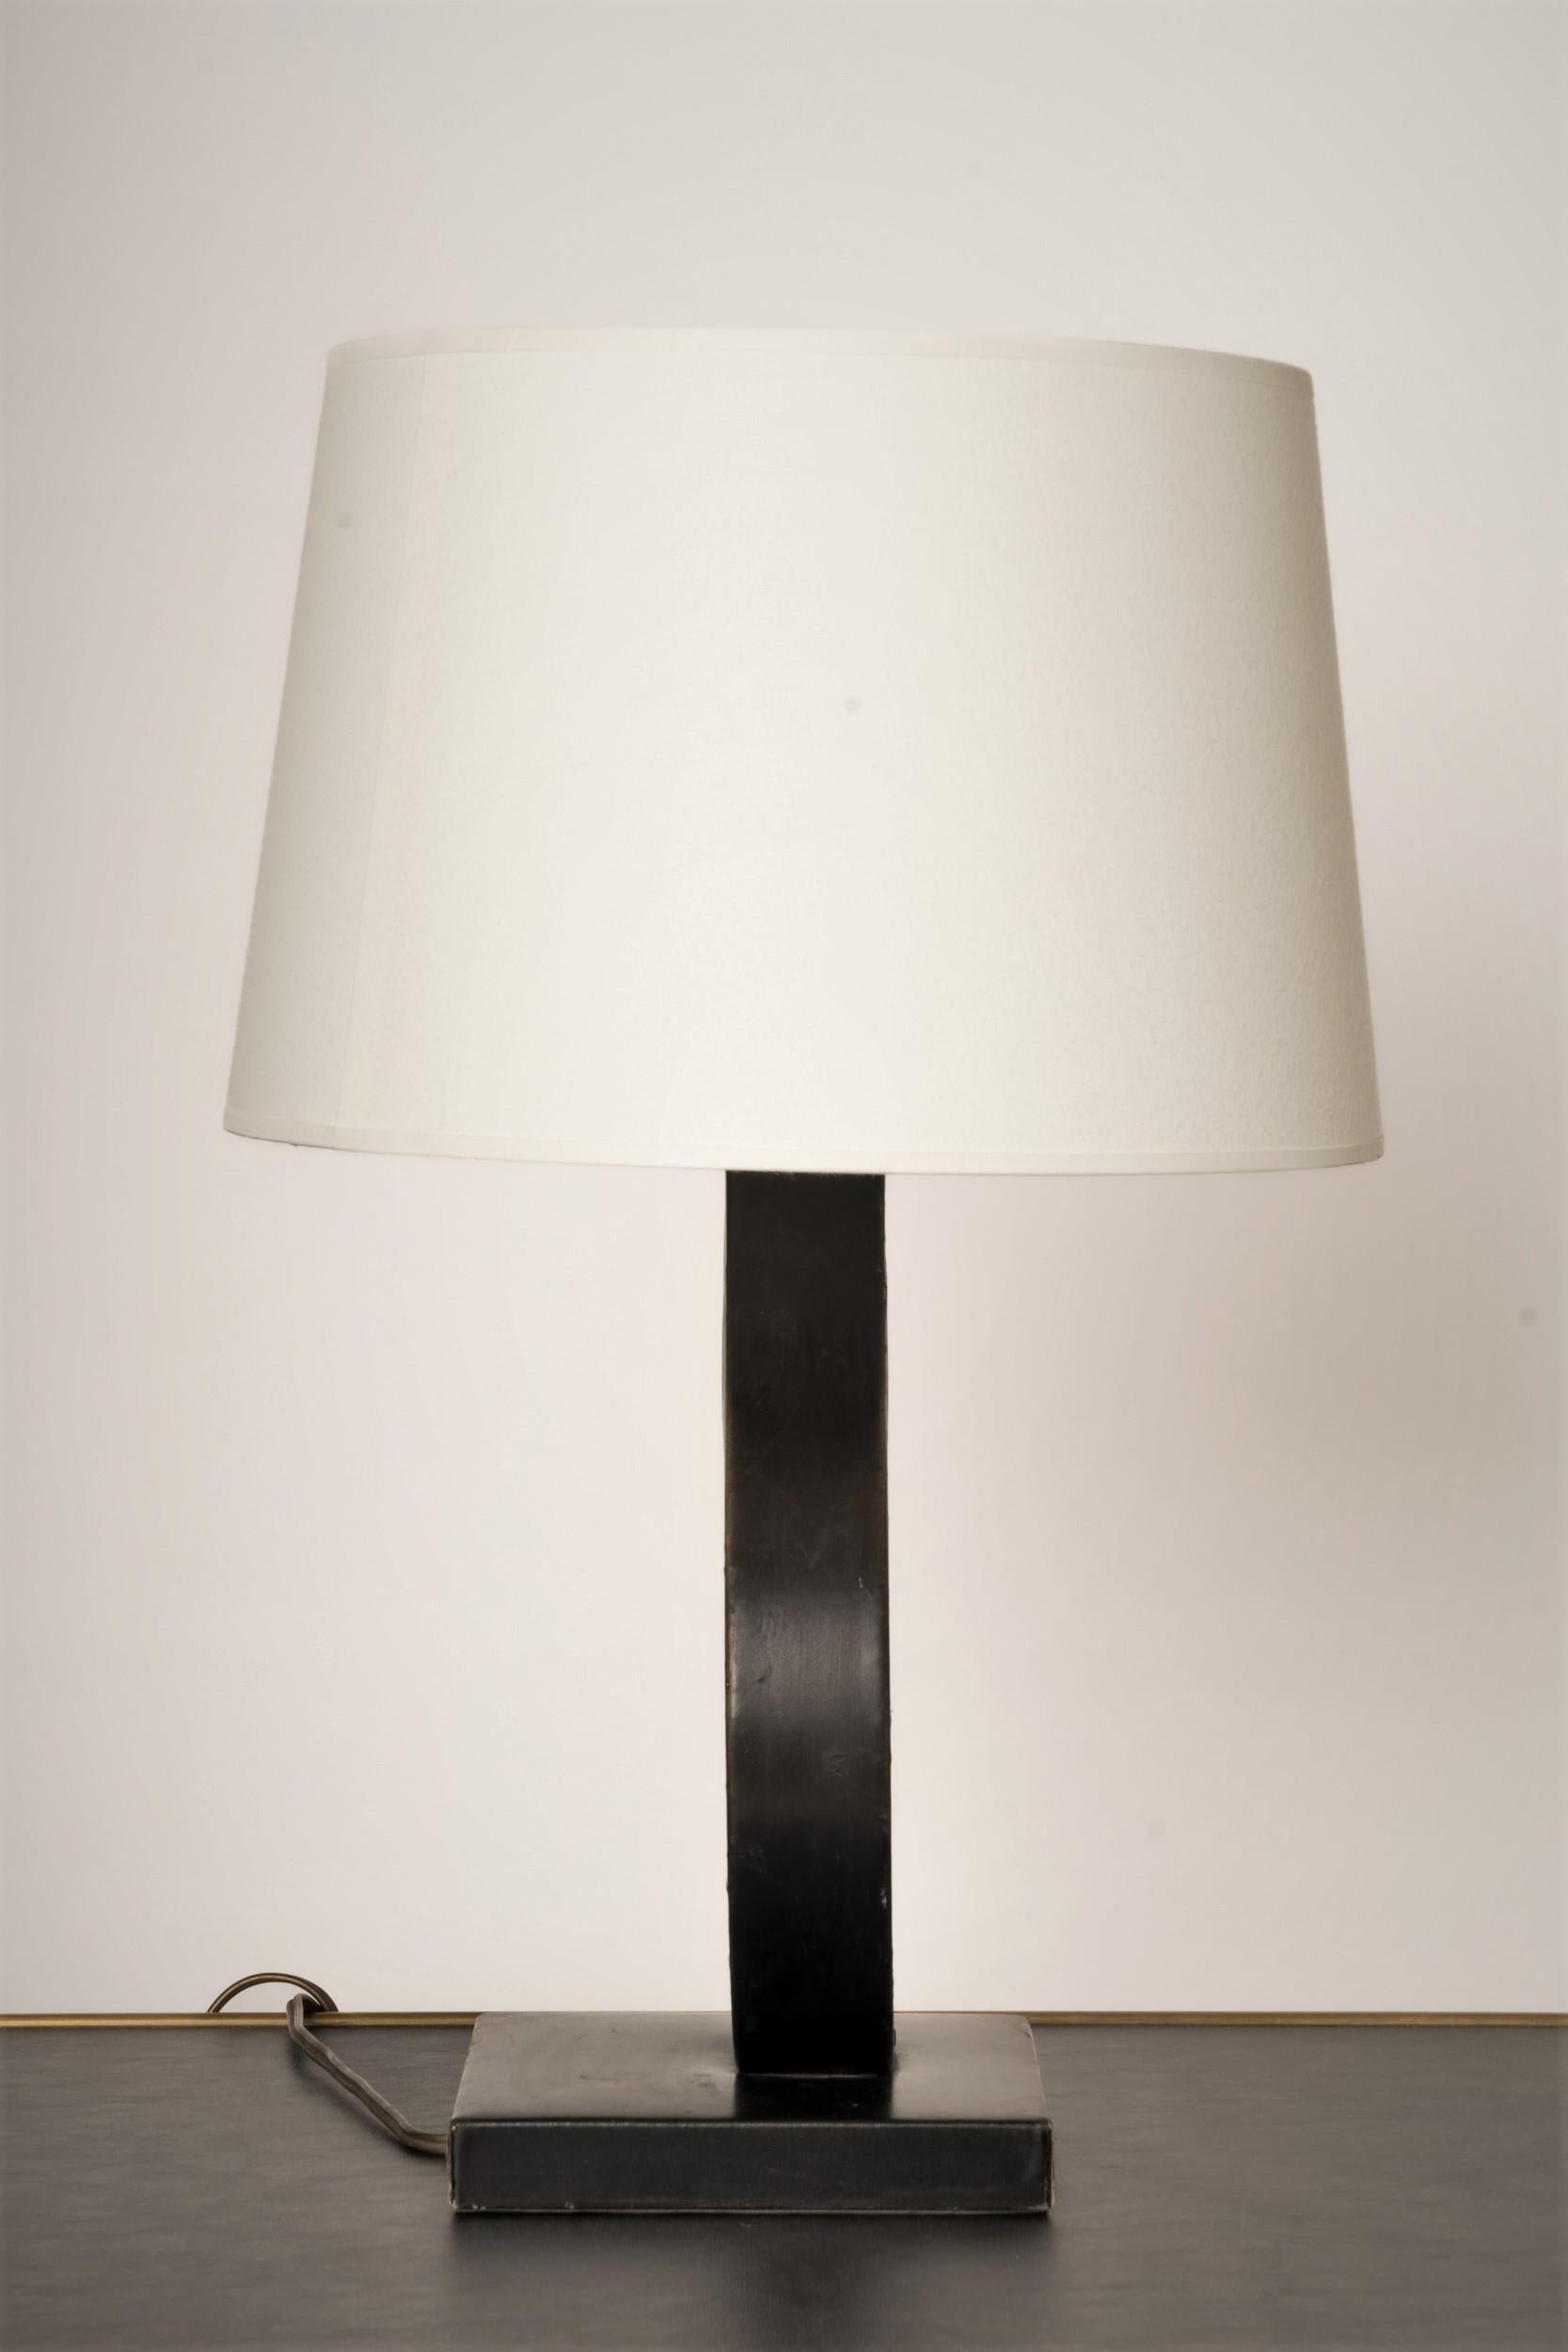 Elegant minimalist table lamp covered table lamp in the style of Jacques Adnet. European socket and wiring. 
Minor structural damages.
This lamp will ship from France and can be returned to either France or to a LIC NY location.
Price does not